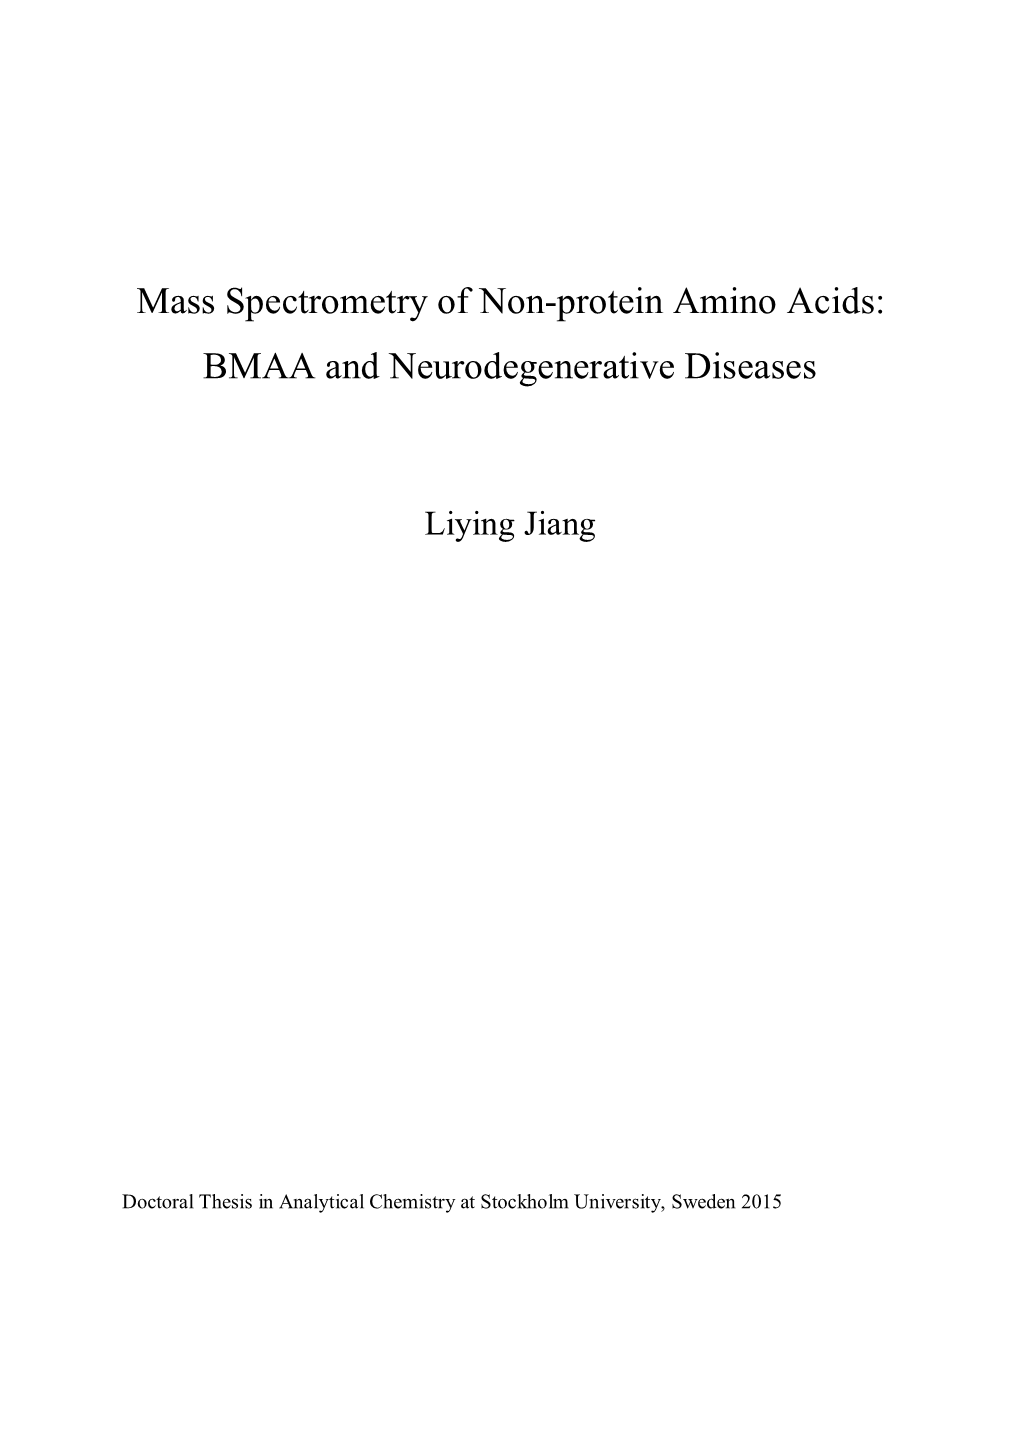 Mass Spectrometry of Non-Protein Amino Acids: BMAA and Neurodegenerative Diseases